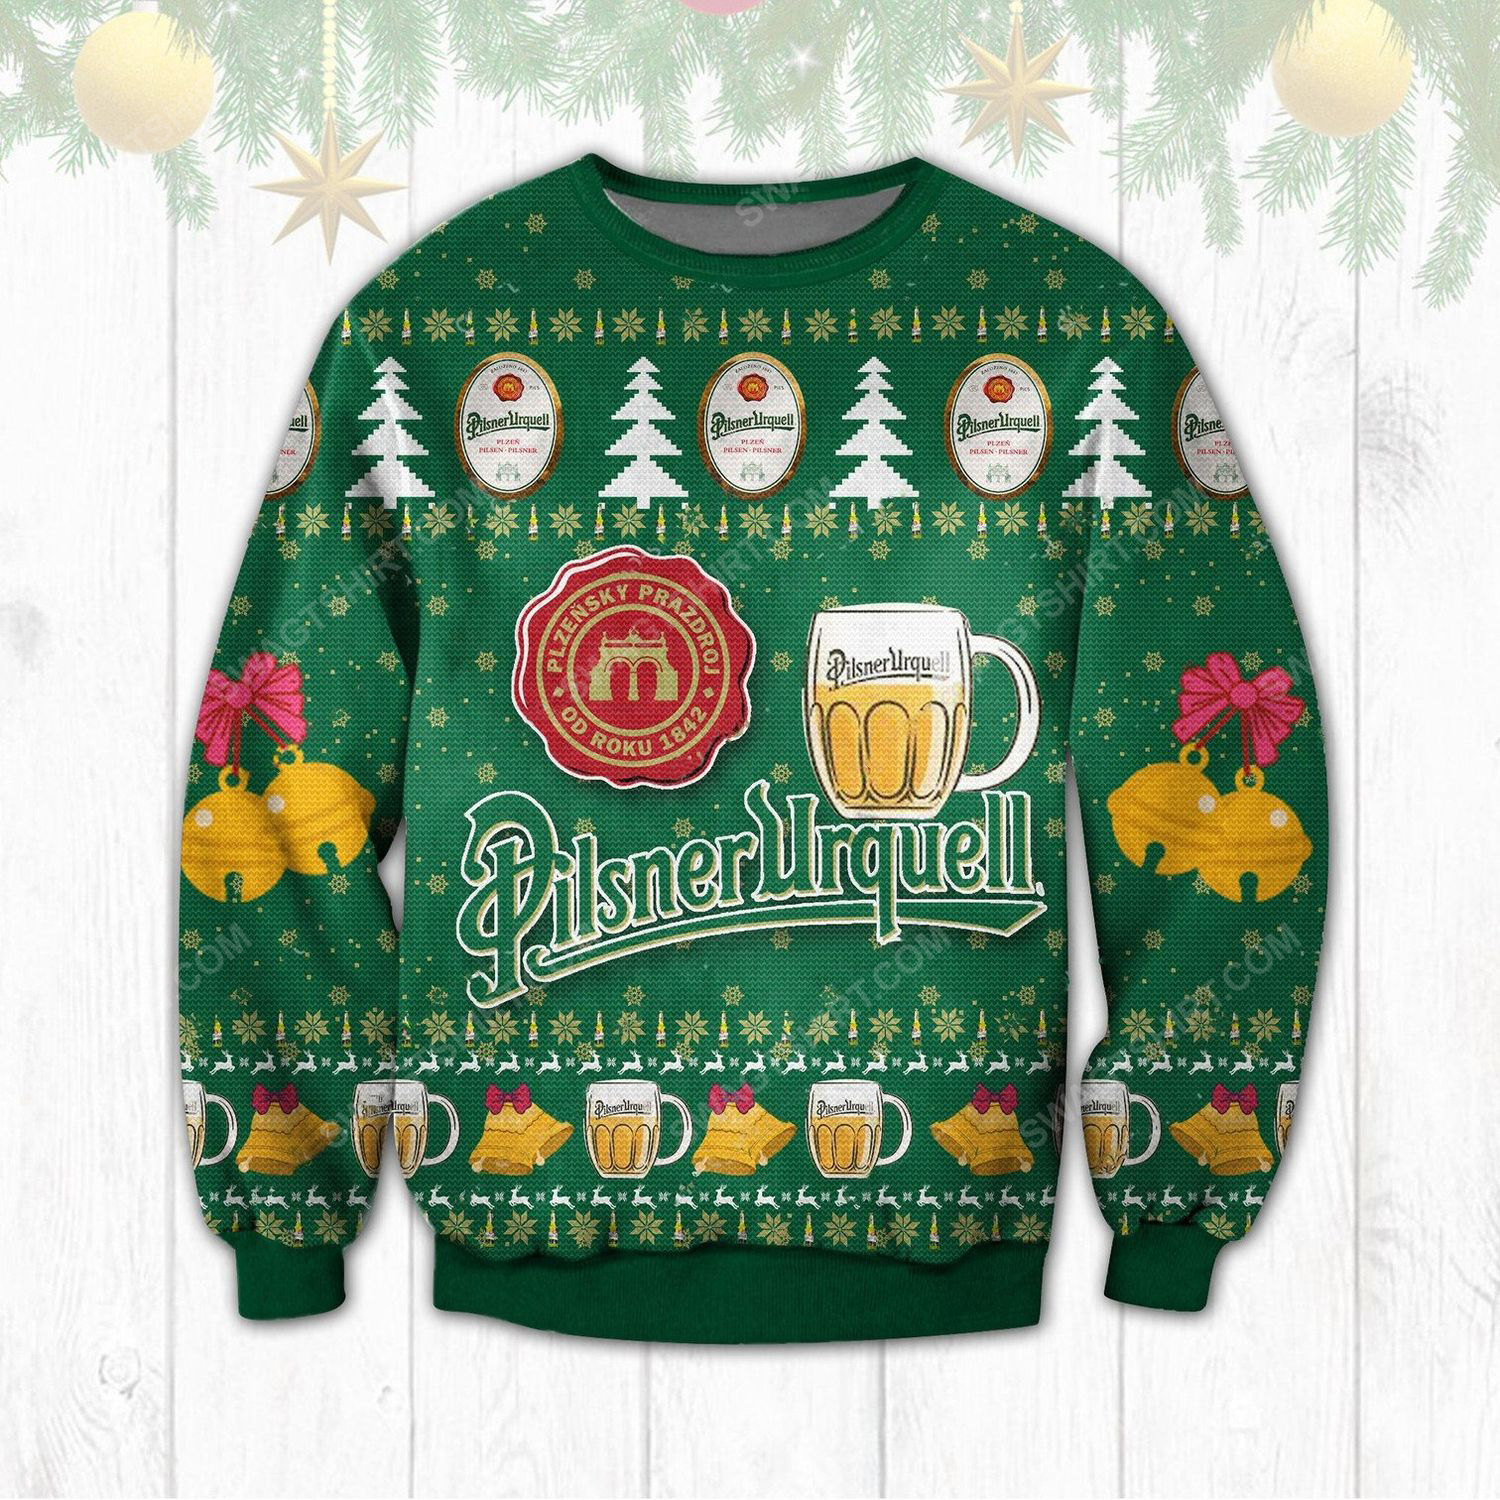 The pilsner urquell beer ugly christmas sweater